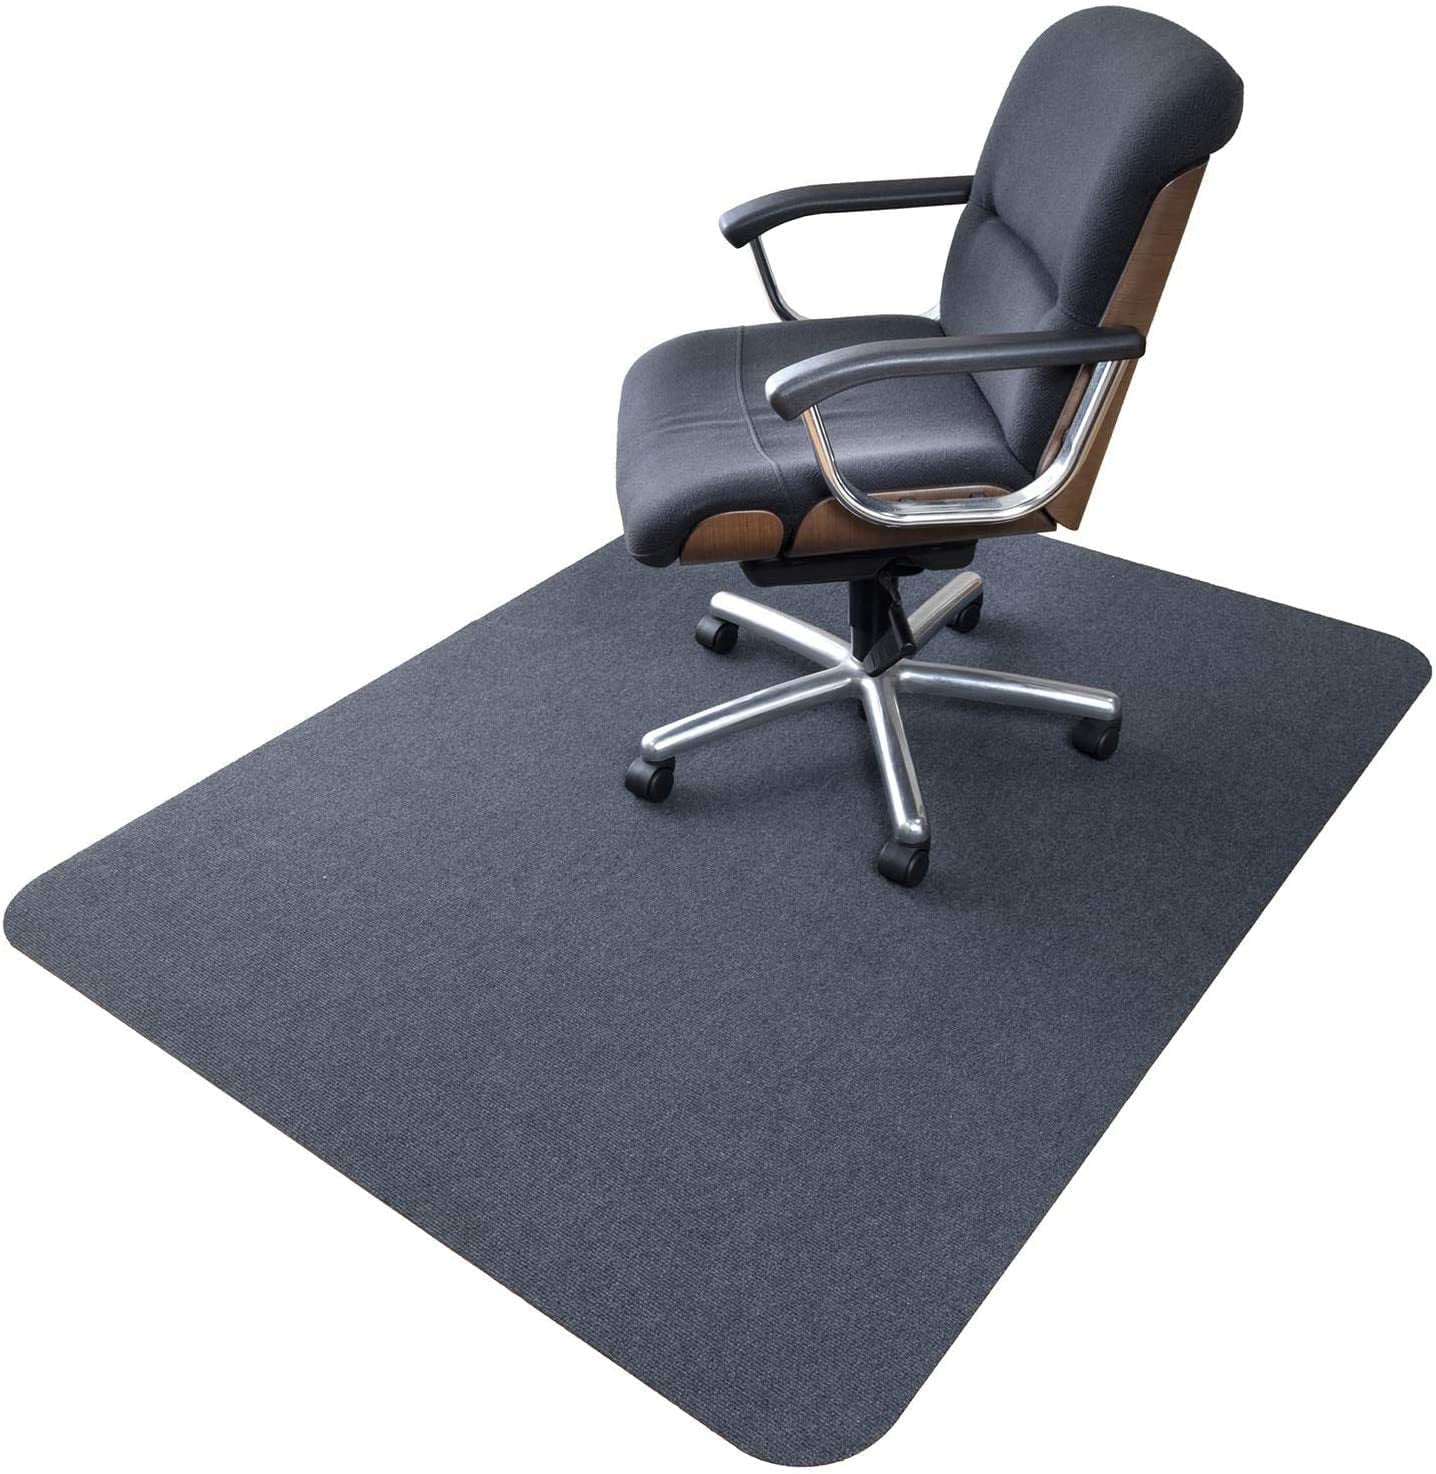 Office Chair Mat, Upgraded Version - Office Desk Chair Mat for Hardwood